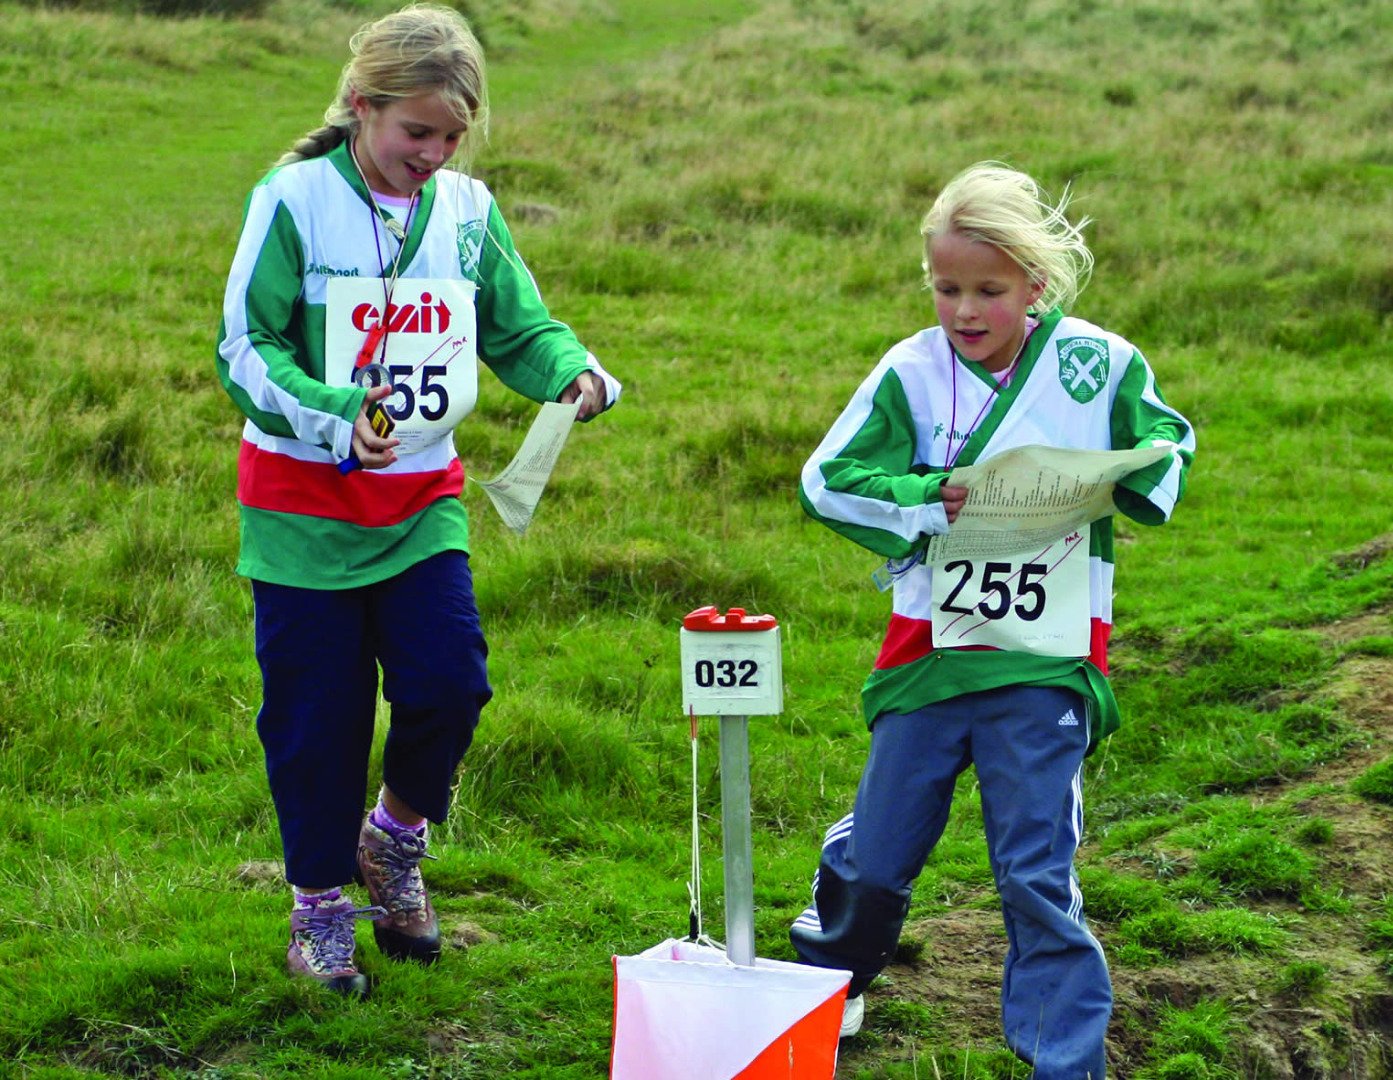 Image name orienteering the 16 image from the post Orienteering in Yorkshire.com.